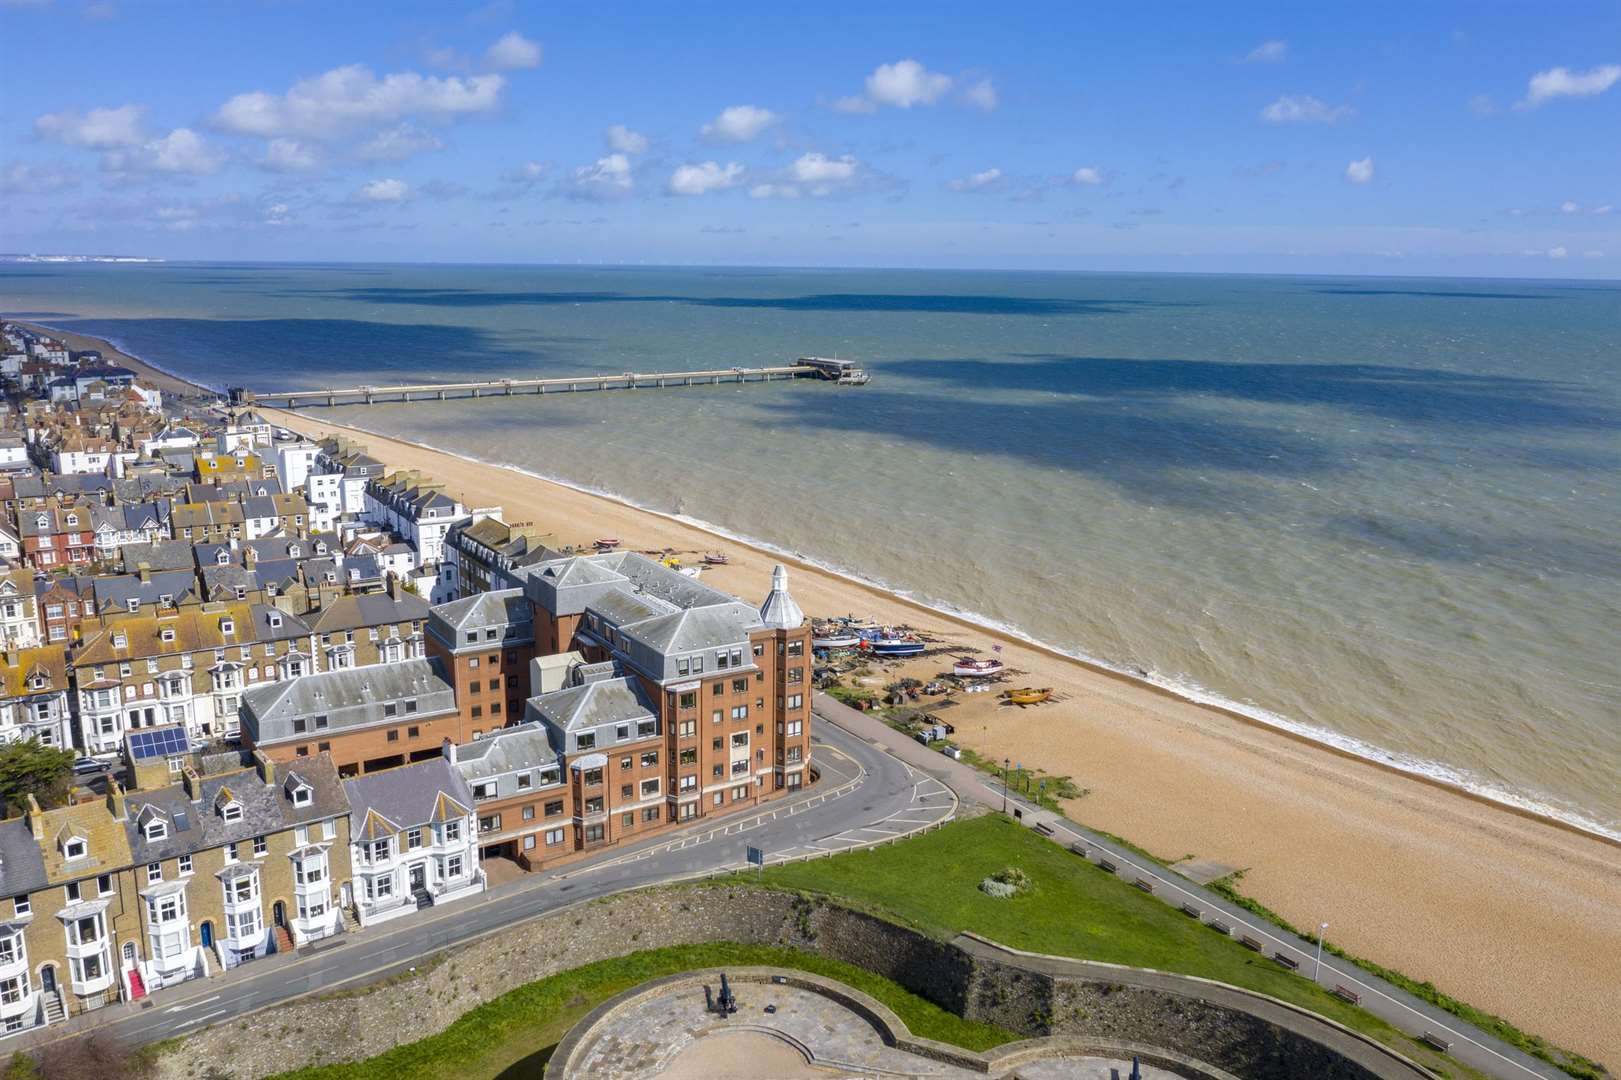 Deal is regarded as one of Kent’s most vibrant seaside towns with many choosing to embrace the lifestyle it has to offer